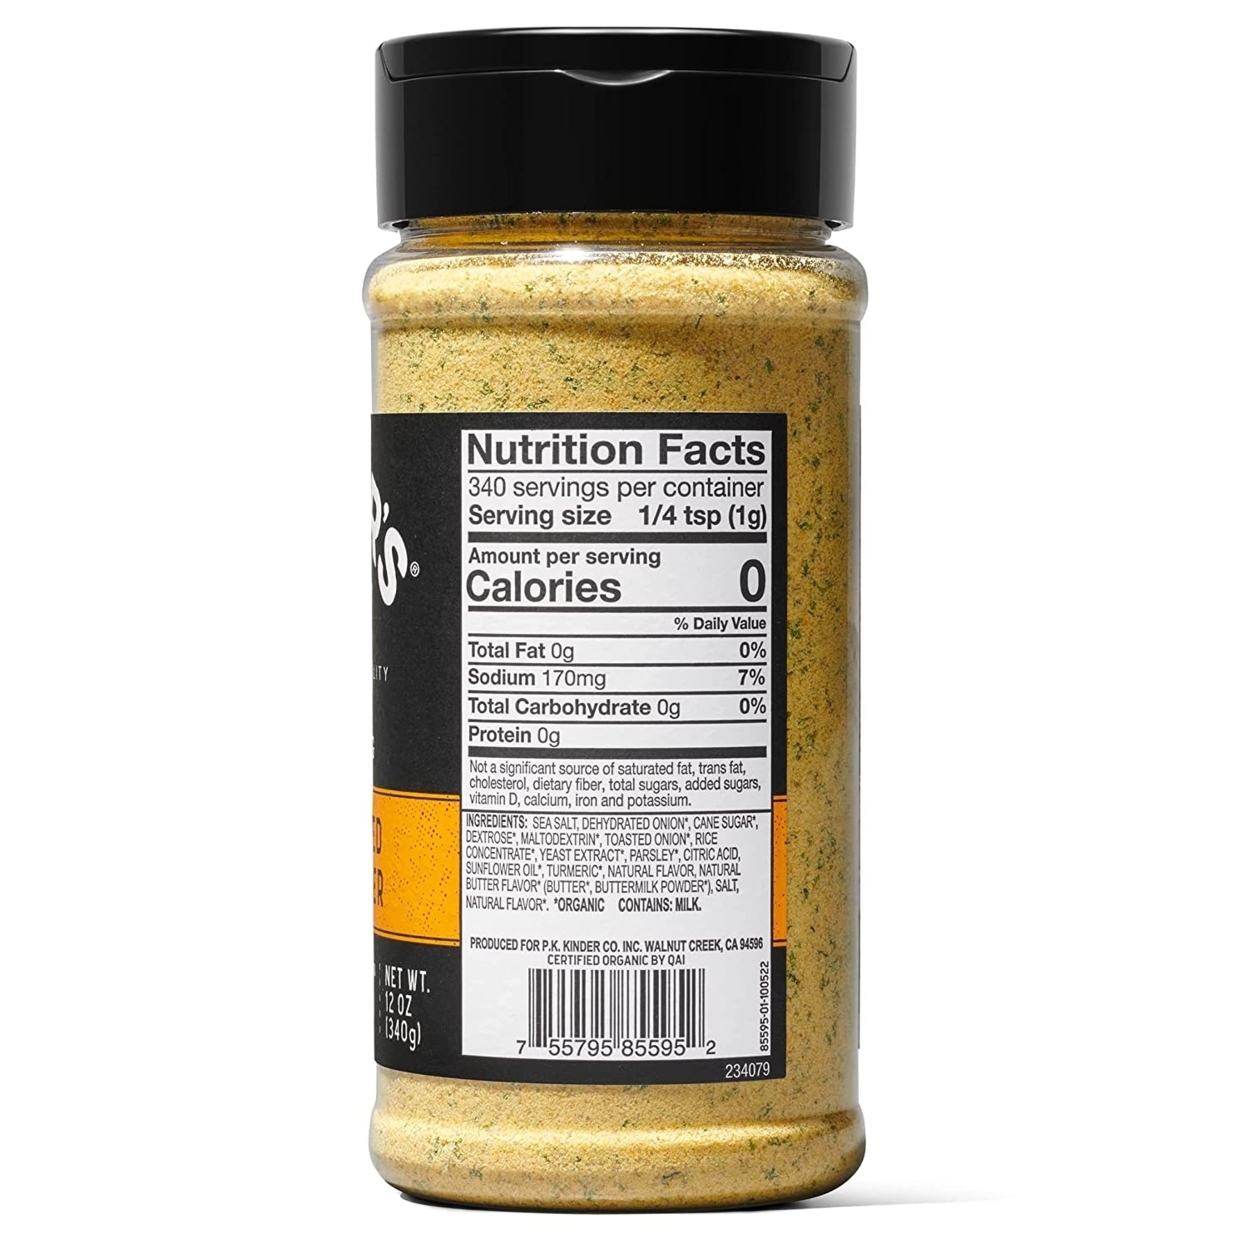 Kinder's Organic Caramelized Onion Butter Seasoning, 12 Ounce